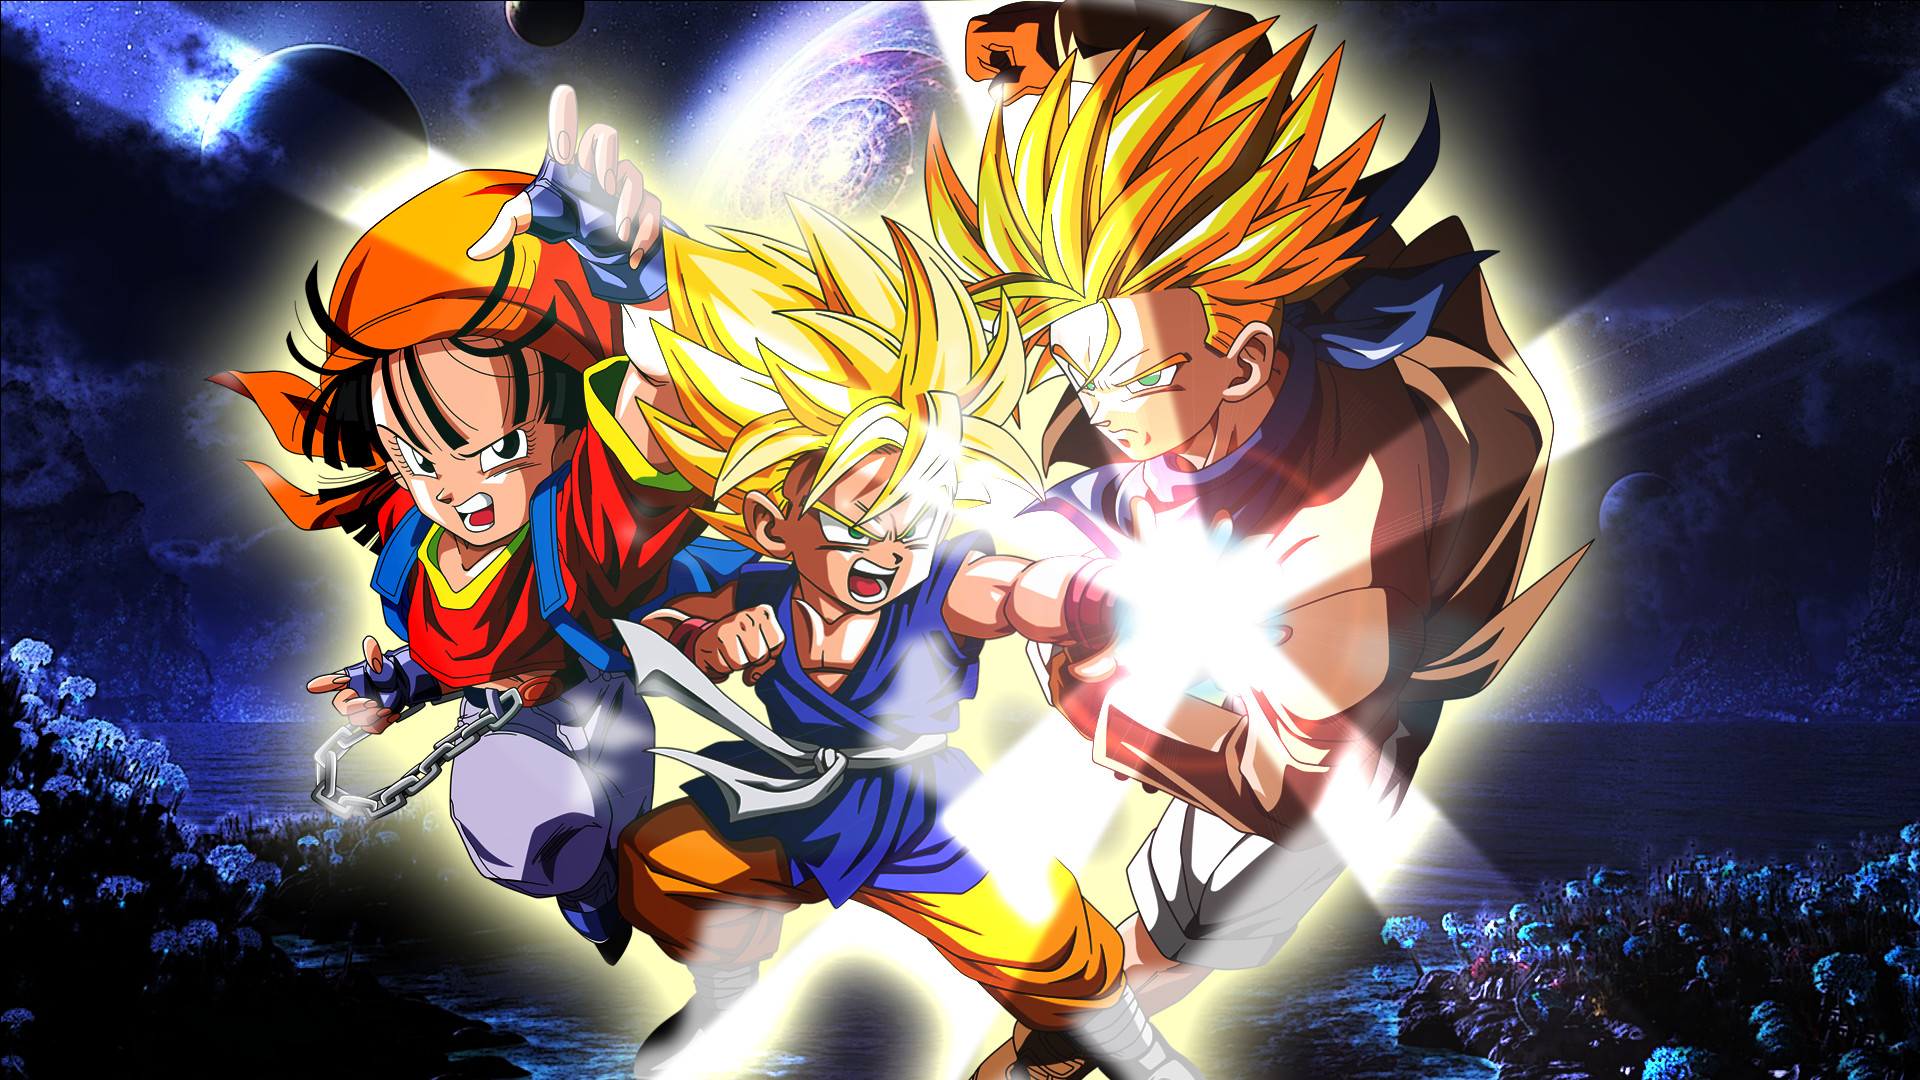 Download Dragon Ball Gt wallpapers for mobile phone, free